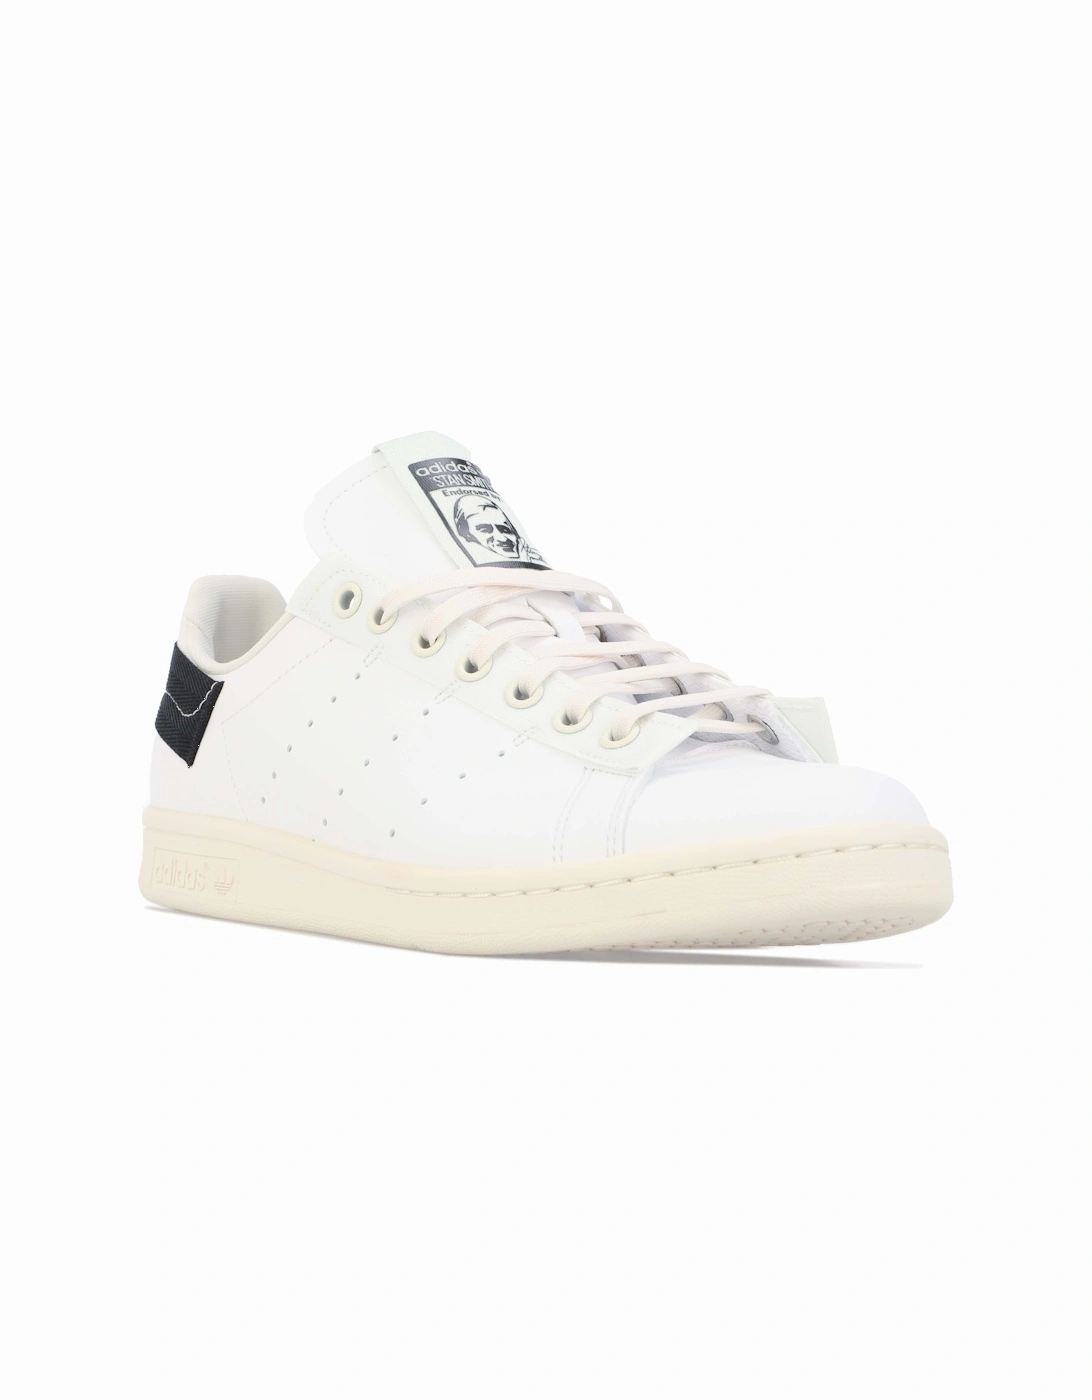 Men's Mens Stan Smith Parley Trainers - White - Size: 5